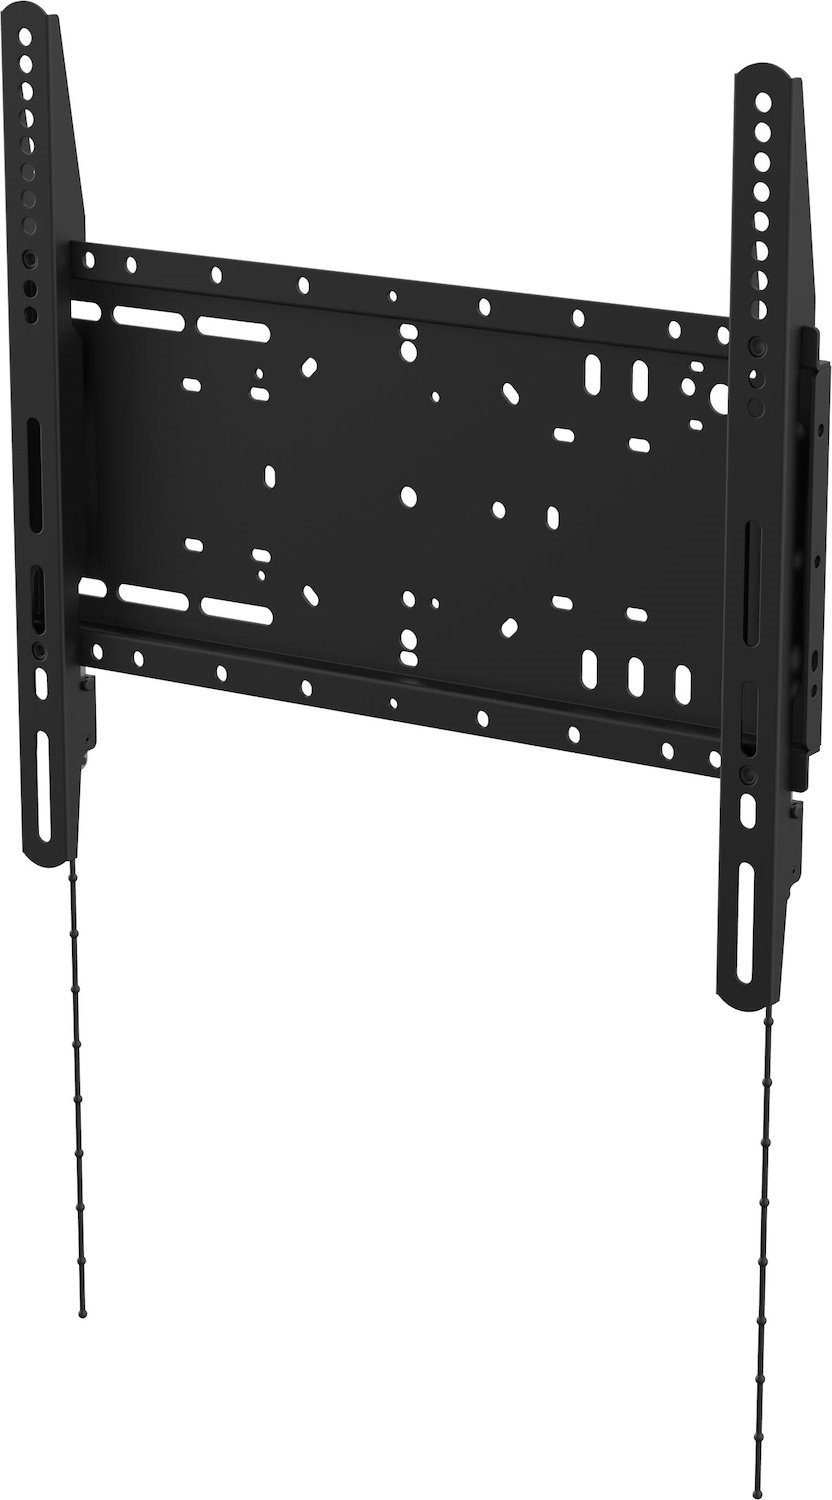 Vision VFM-W4X4 Signage Display Mount 152.4 CM [60] Black (Vision Heavy Duty Display Wall Mount - Lifetime Warranty - Fits Display 32-75 With Vesa Sizes Up To 400 X 400 Including 350 X 350 - Non-Tilti